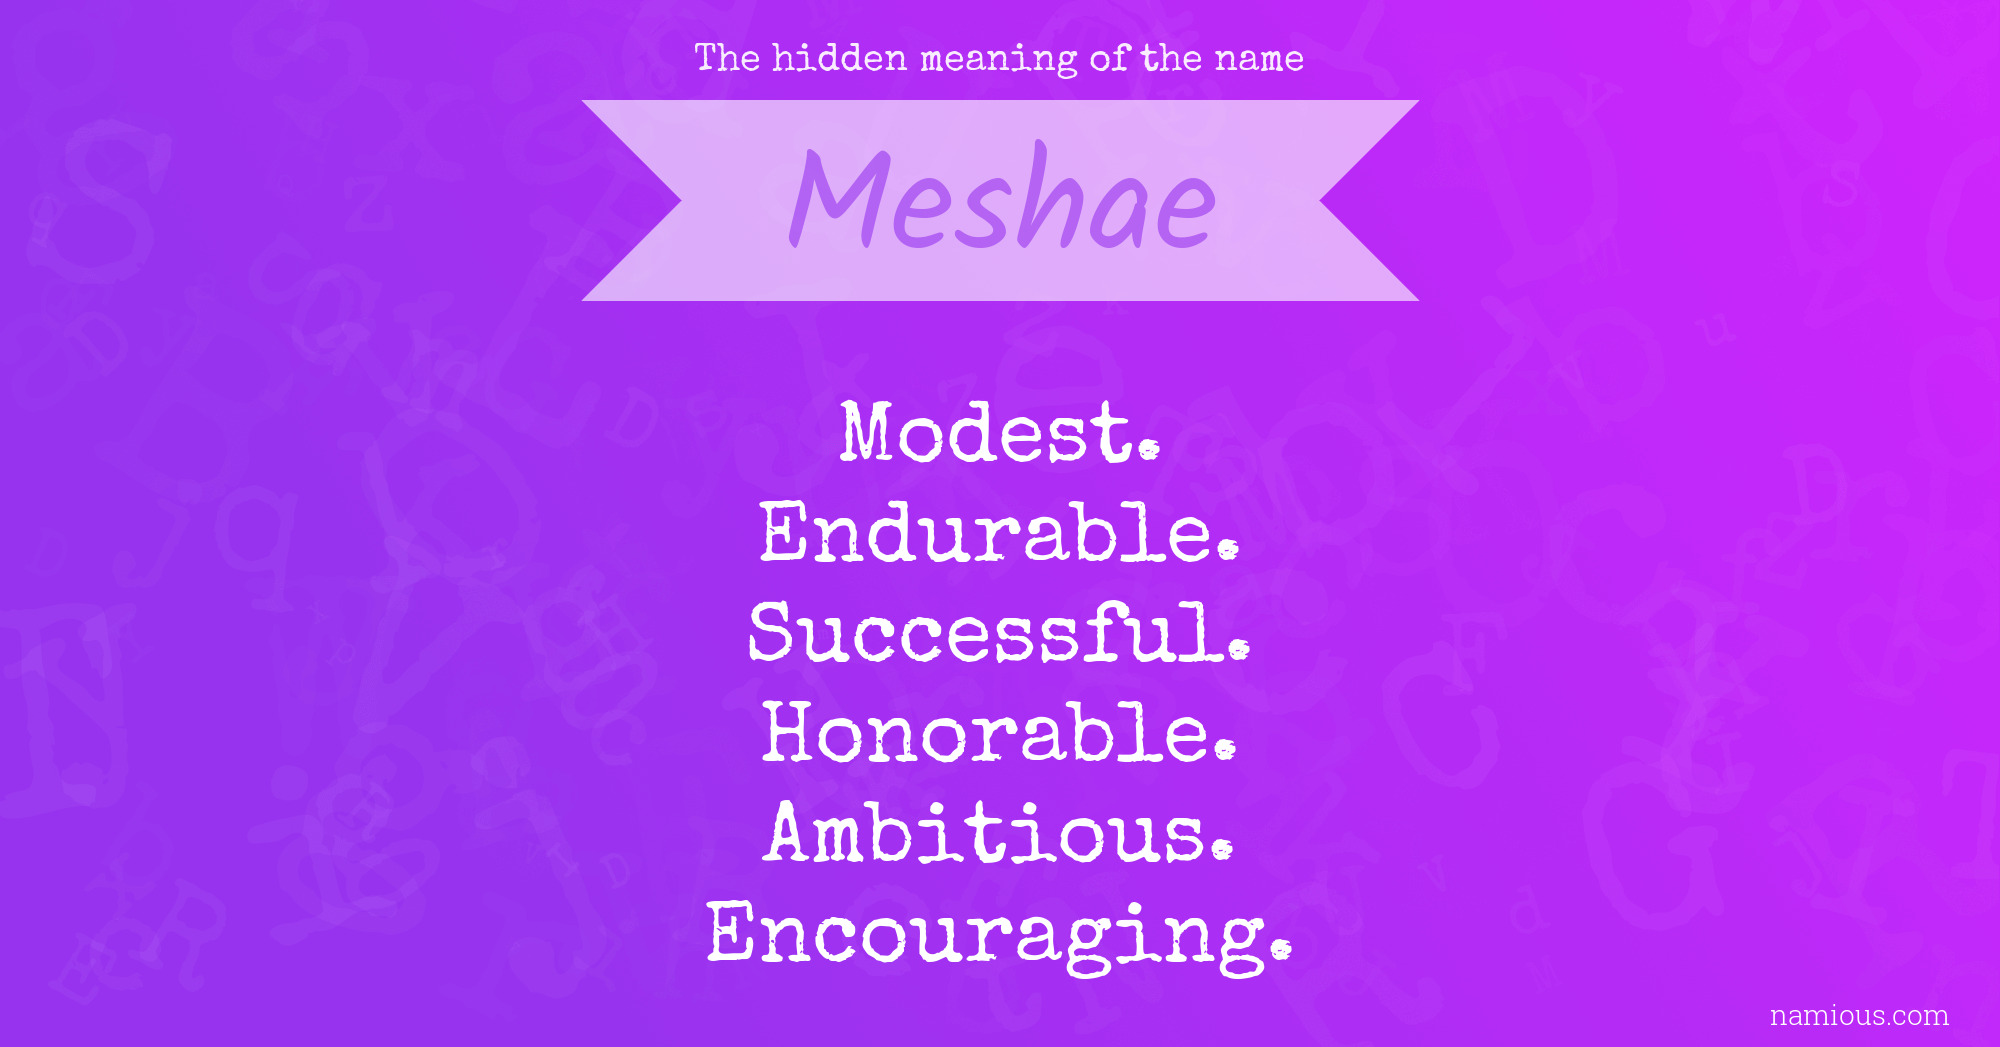 The hidden meaning of the name Meshae